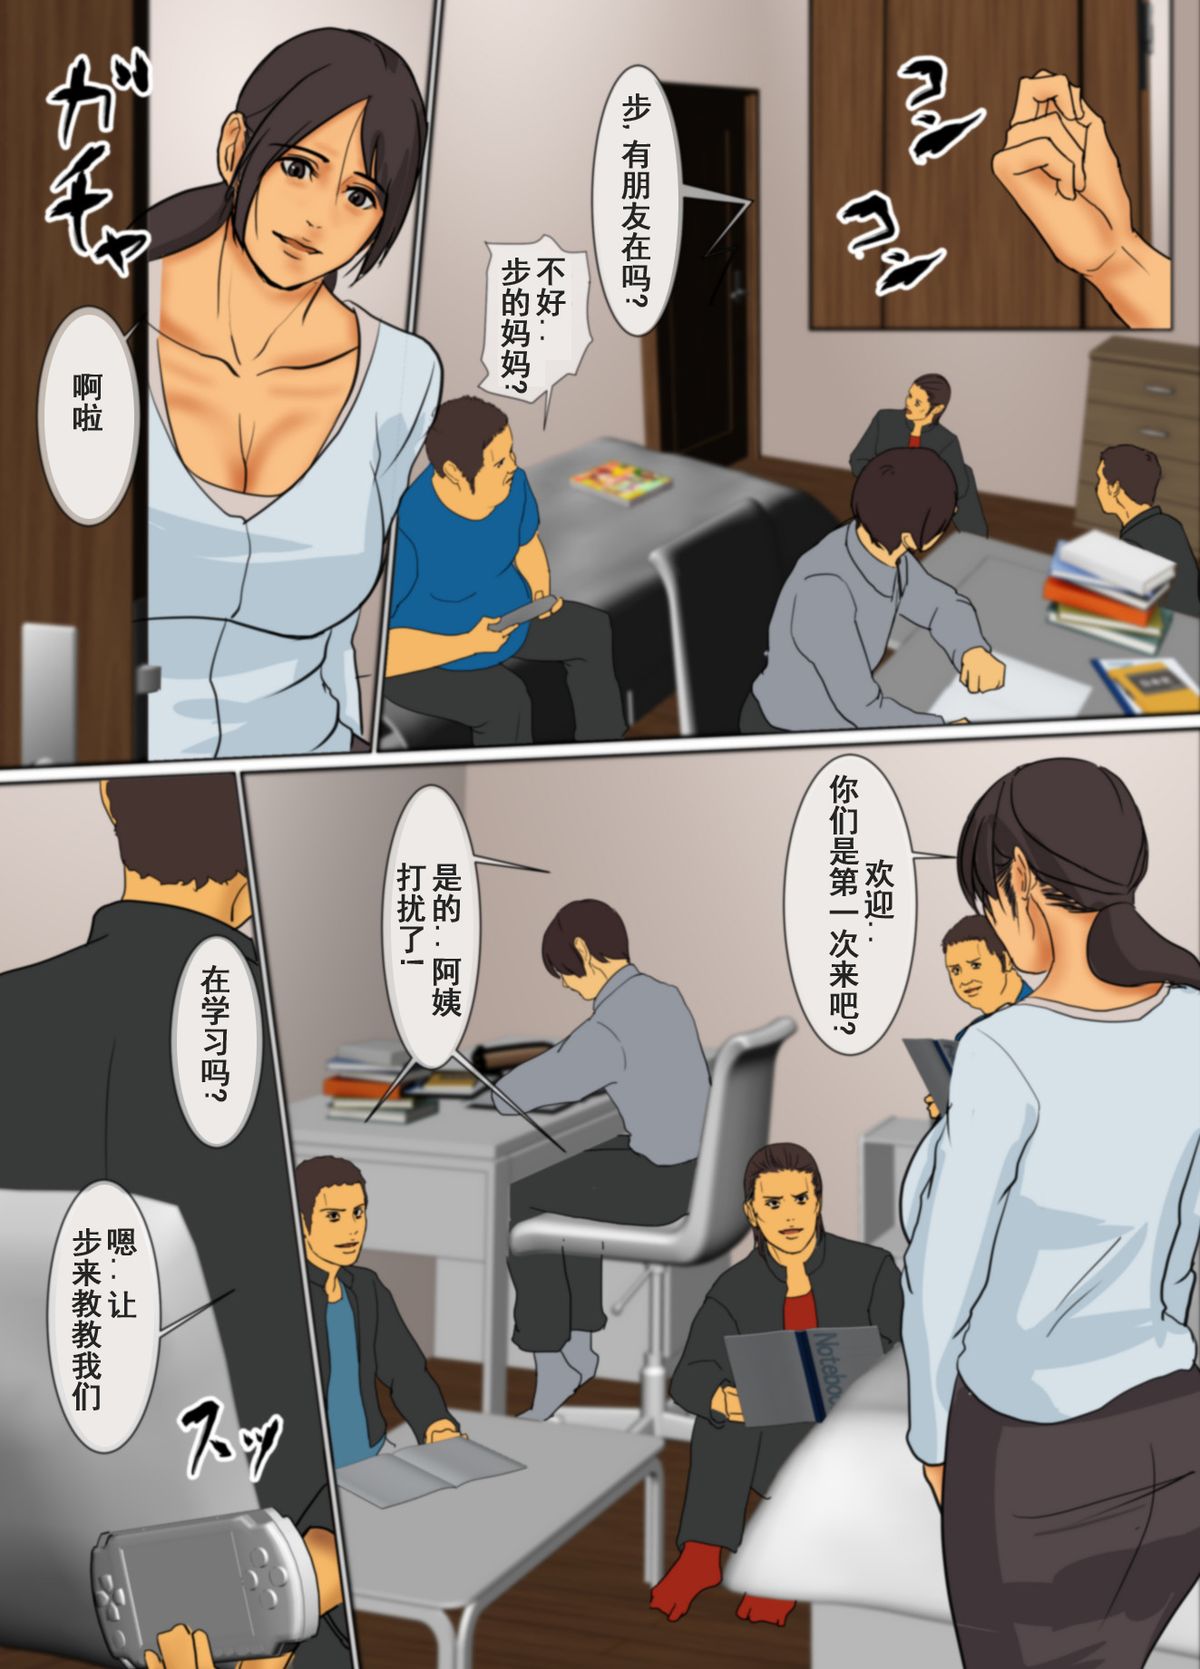 [Yojouhan Shobou] Ikenie no Haha [Chinese] [LeVeL個人漢化] [Ongoing] page 10 full